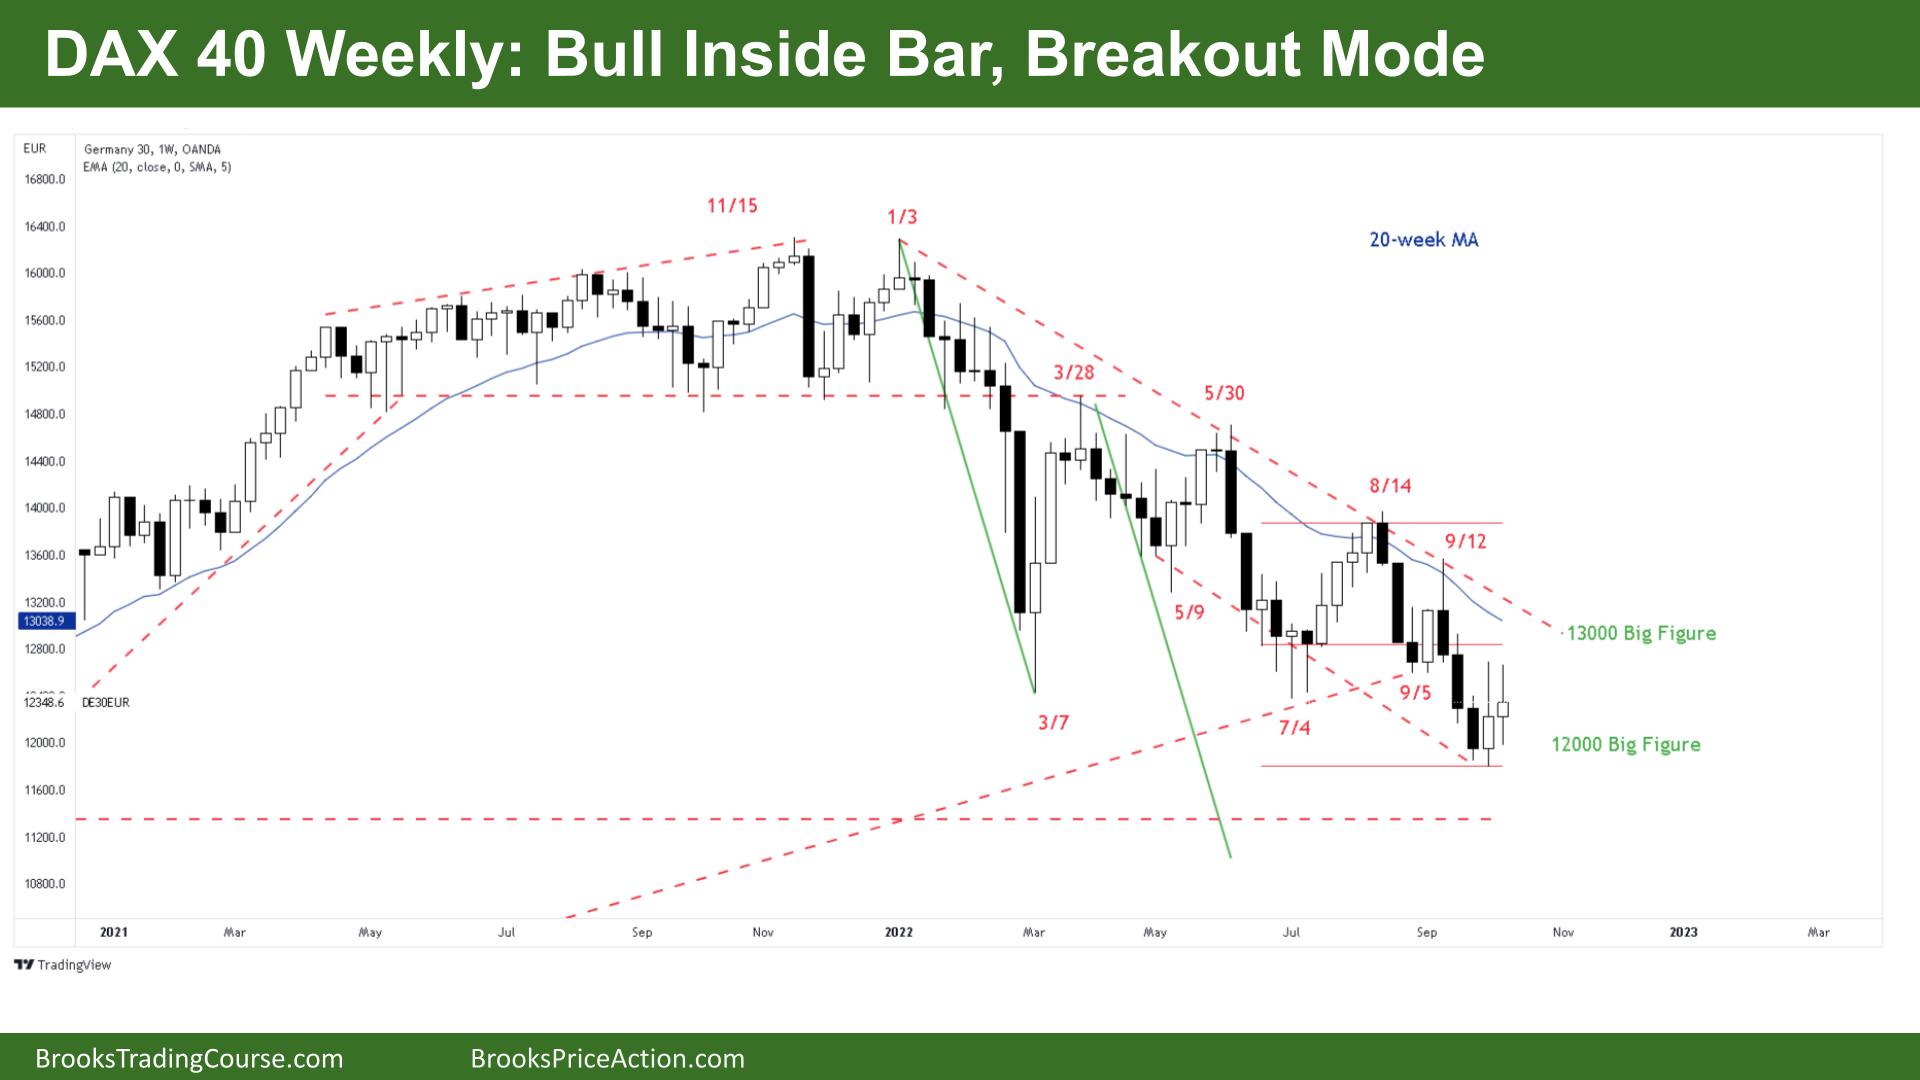 DAX 40 Breakout Mode and Bull Inside Bar on Weekly Chart.